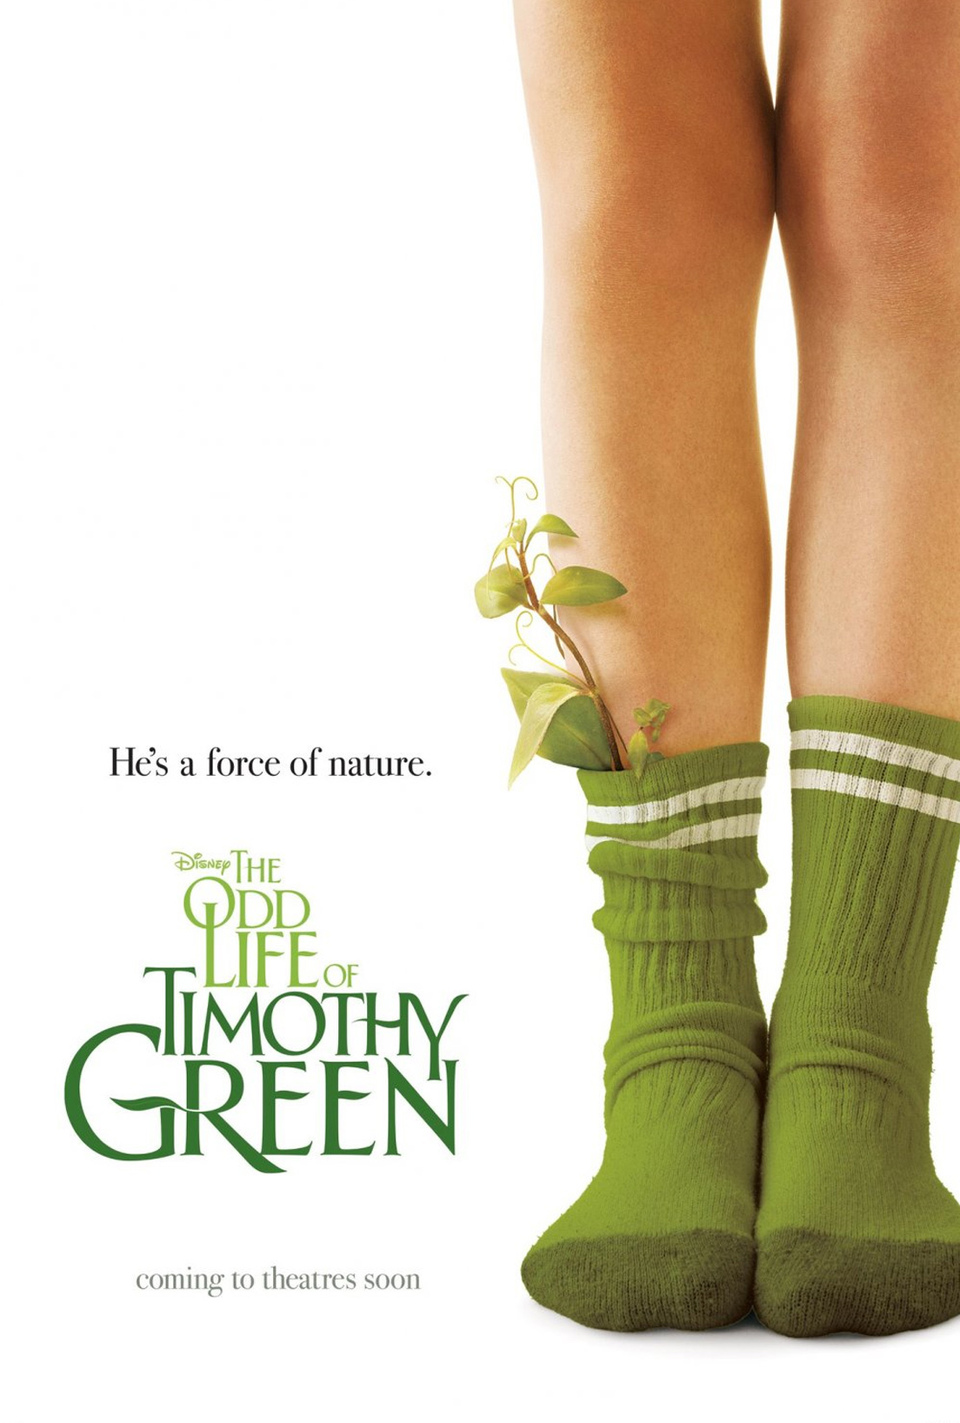 Poster of The odd life of Timothy Green - EEUU